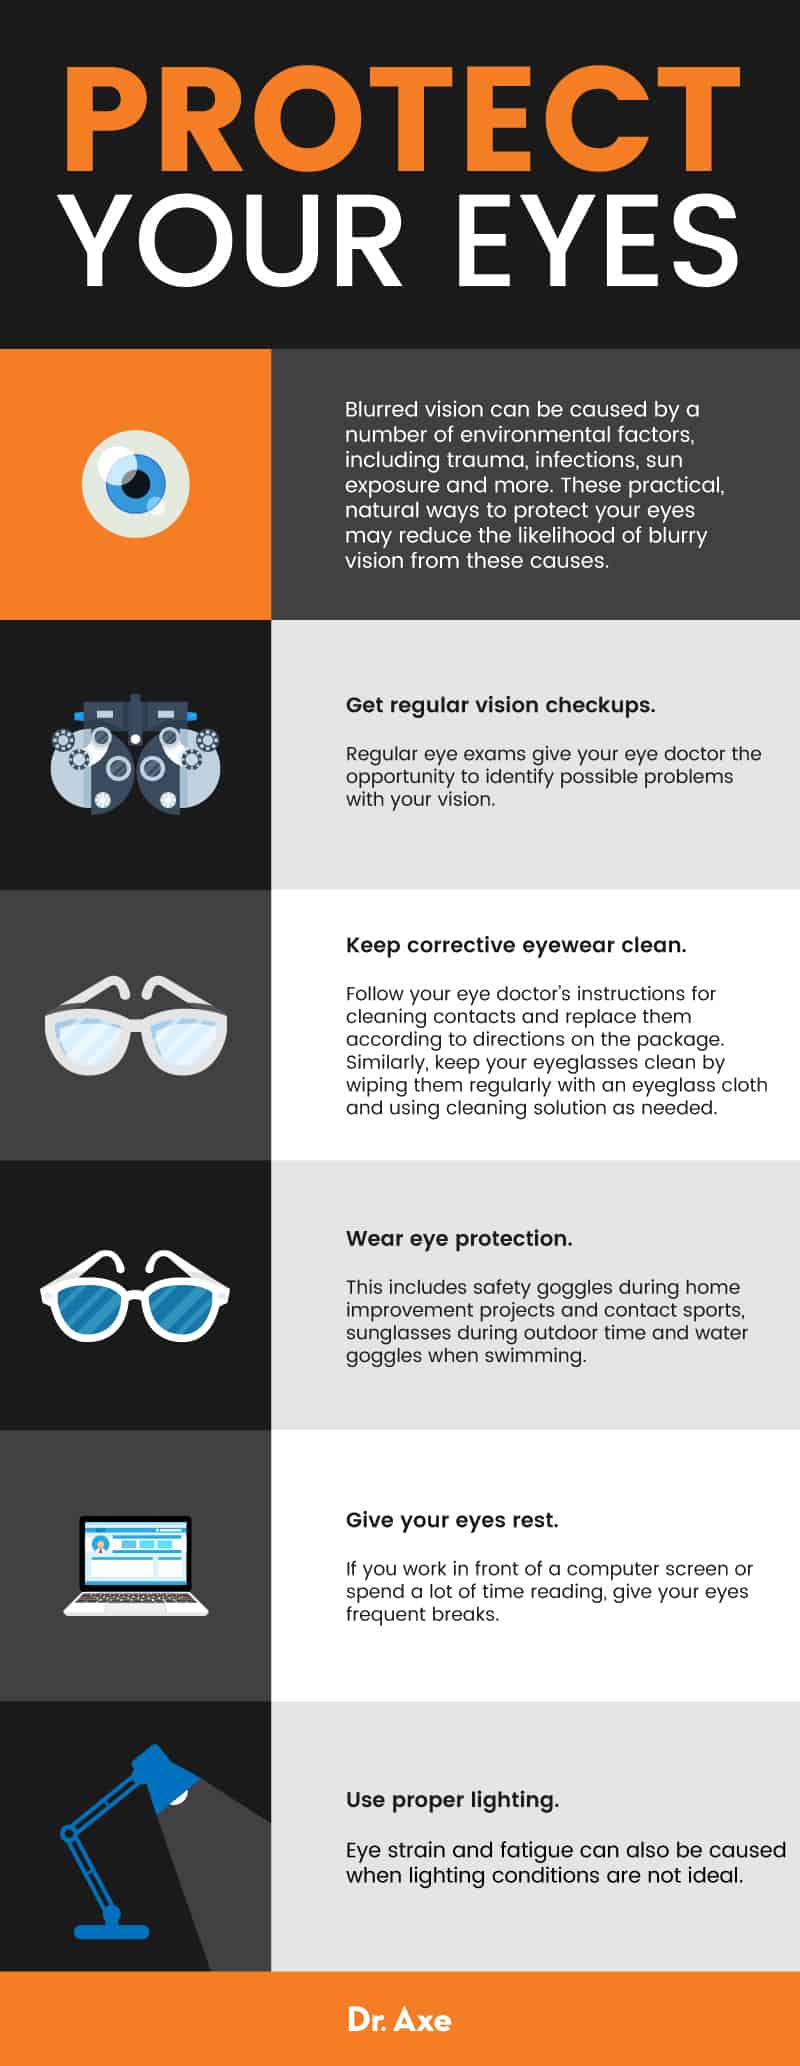 Blurry vision: protect your eyes